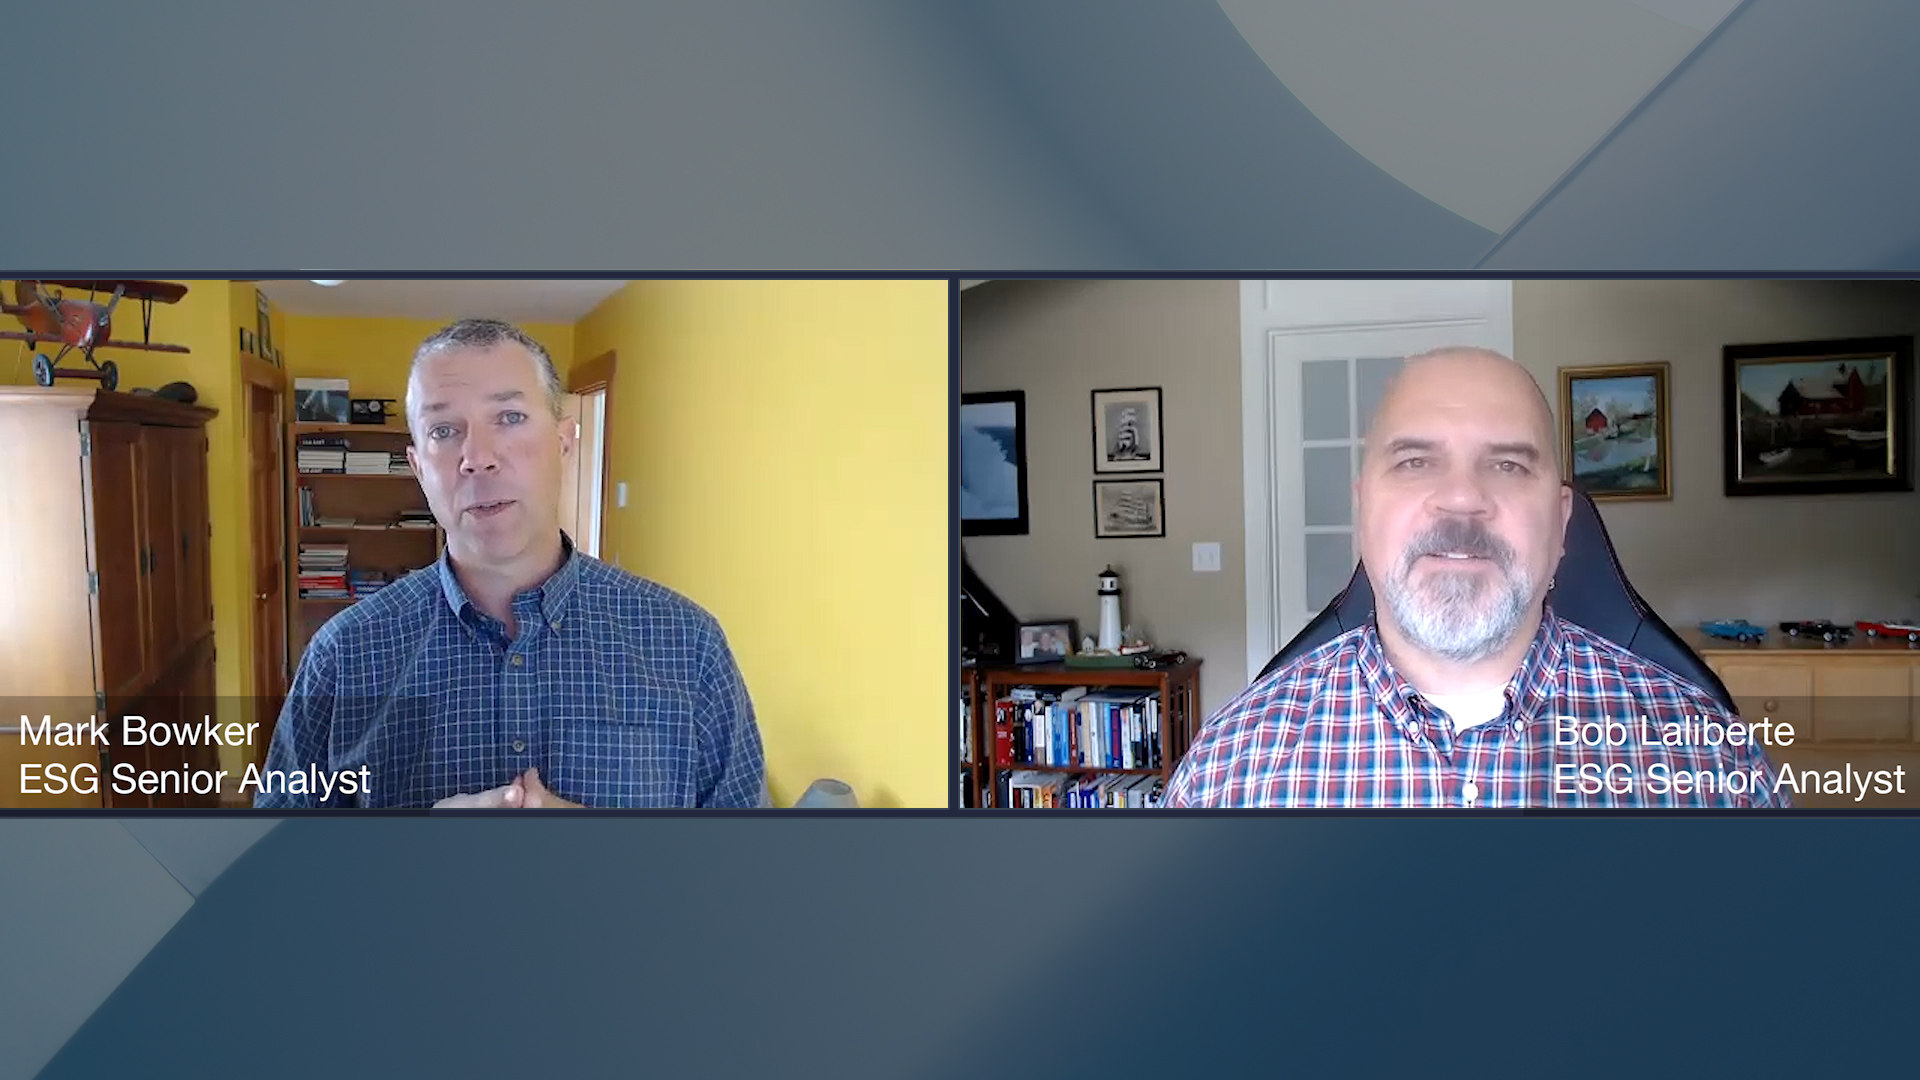 Distributed Cloud & Digital Ecosystems Research Conversation with Mark Bowker and Bob Laliberte (Video)